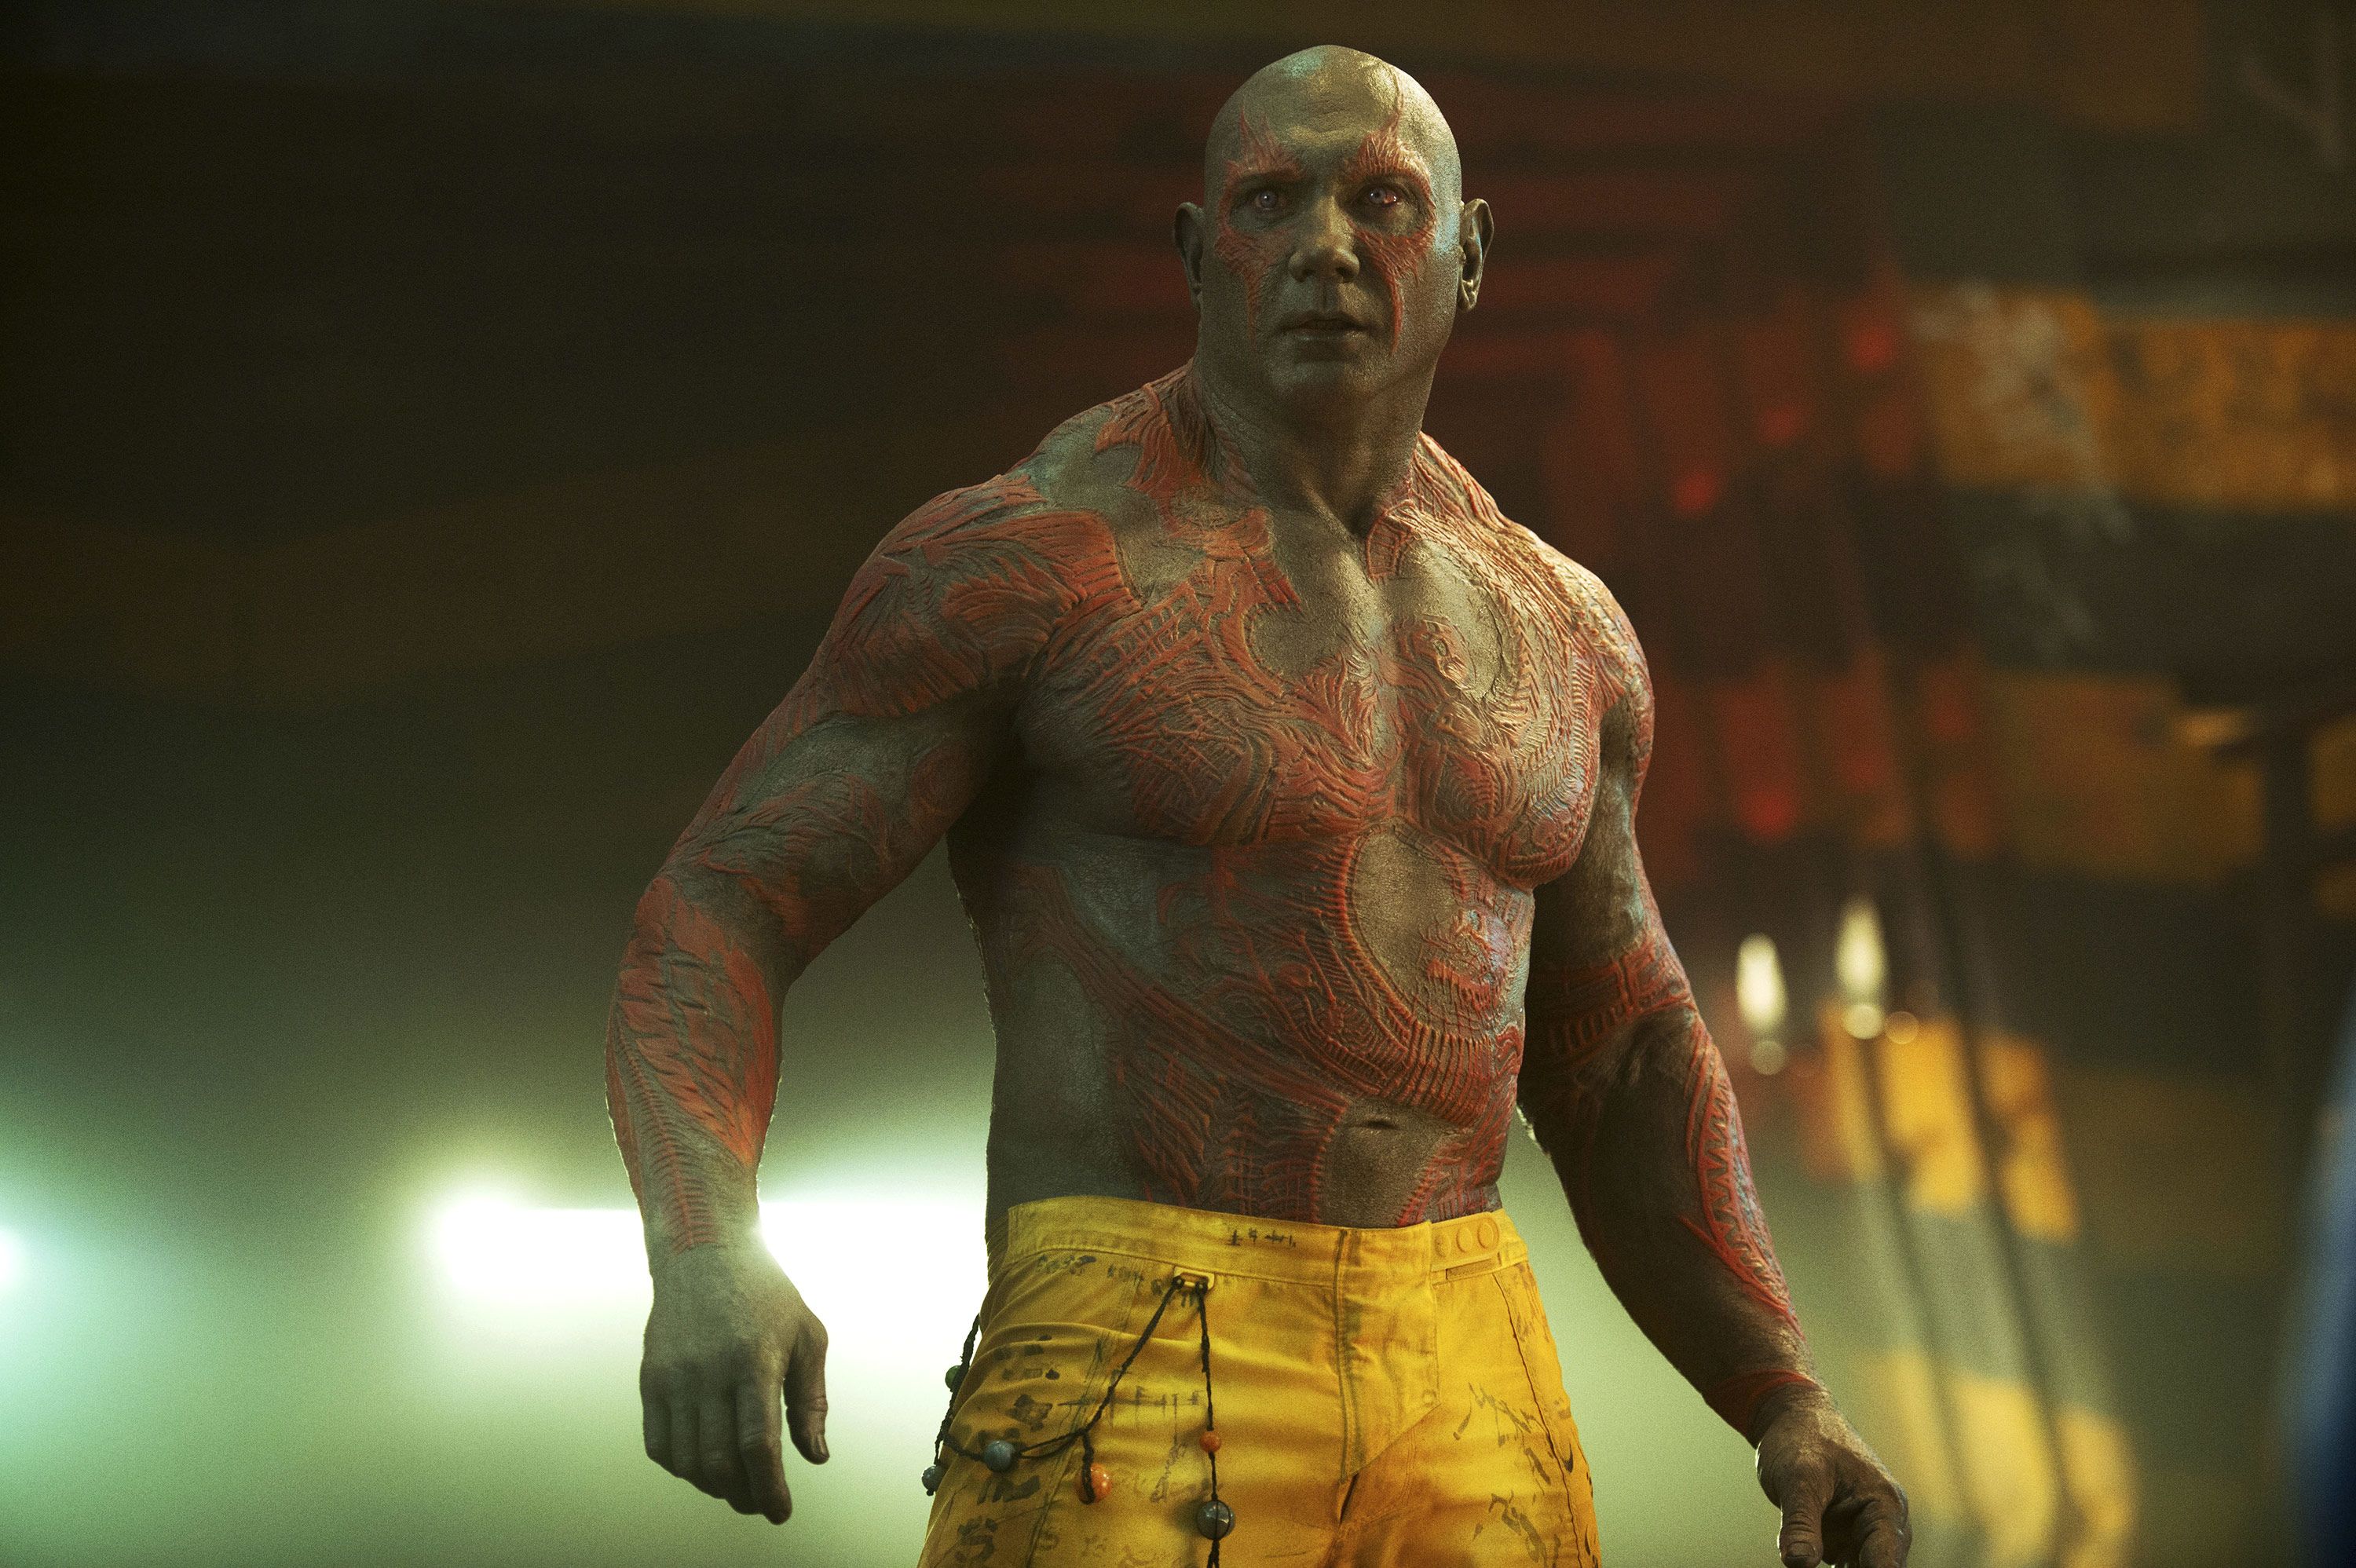 ScreenAnarchy Talks to Dave Bautista, From GUARDIANS OF THE GALAXY